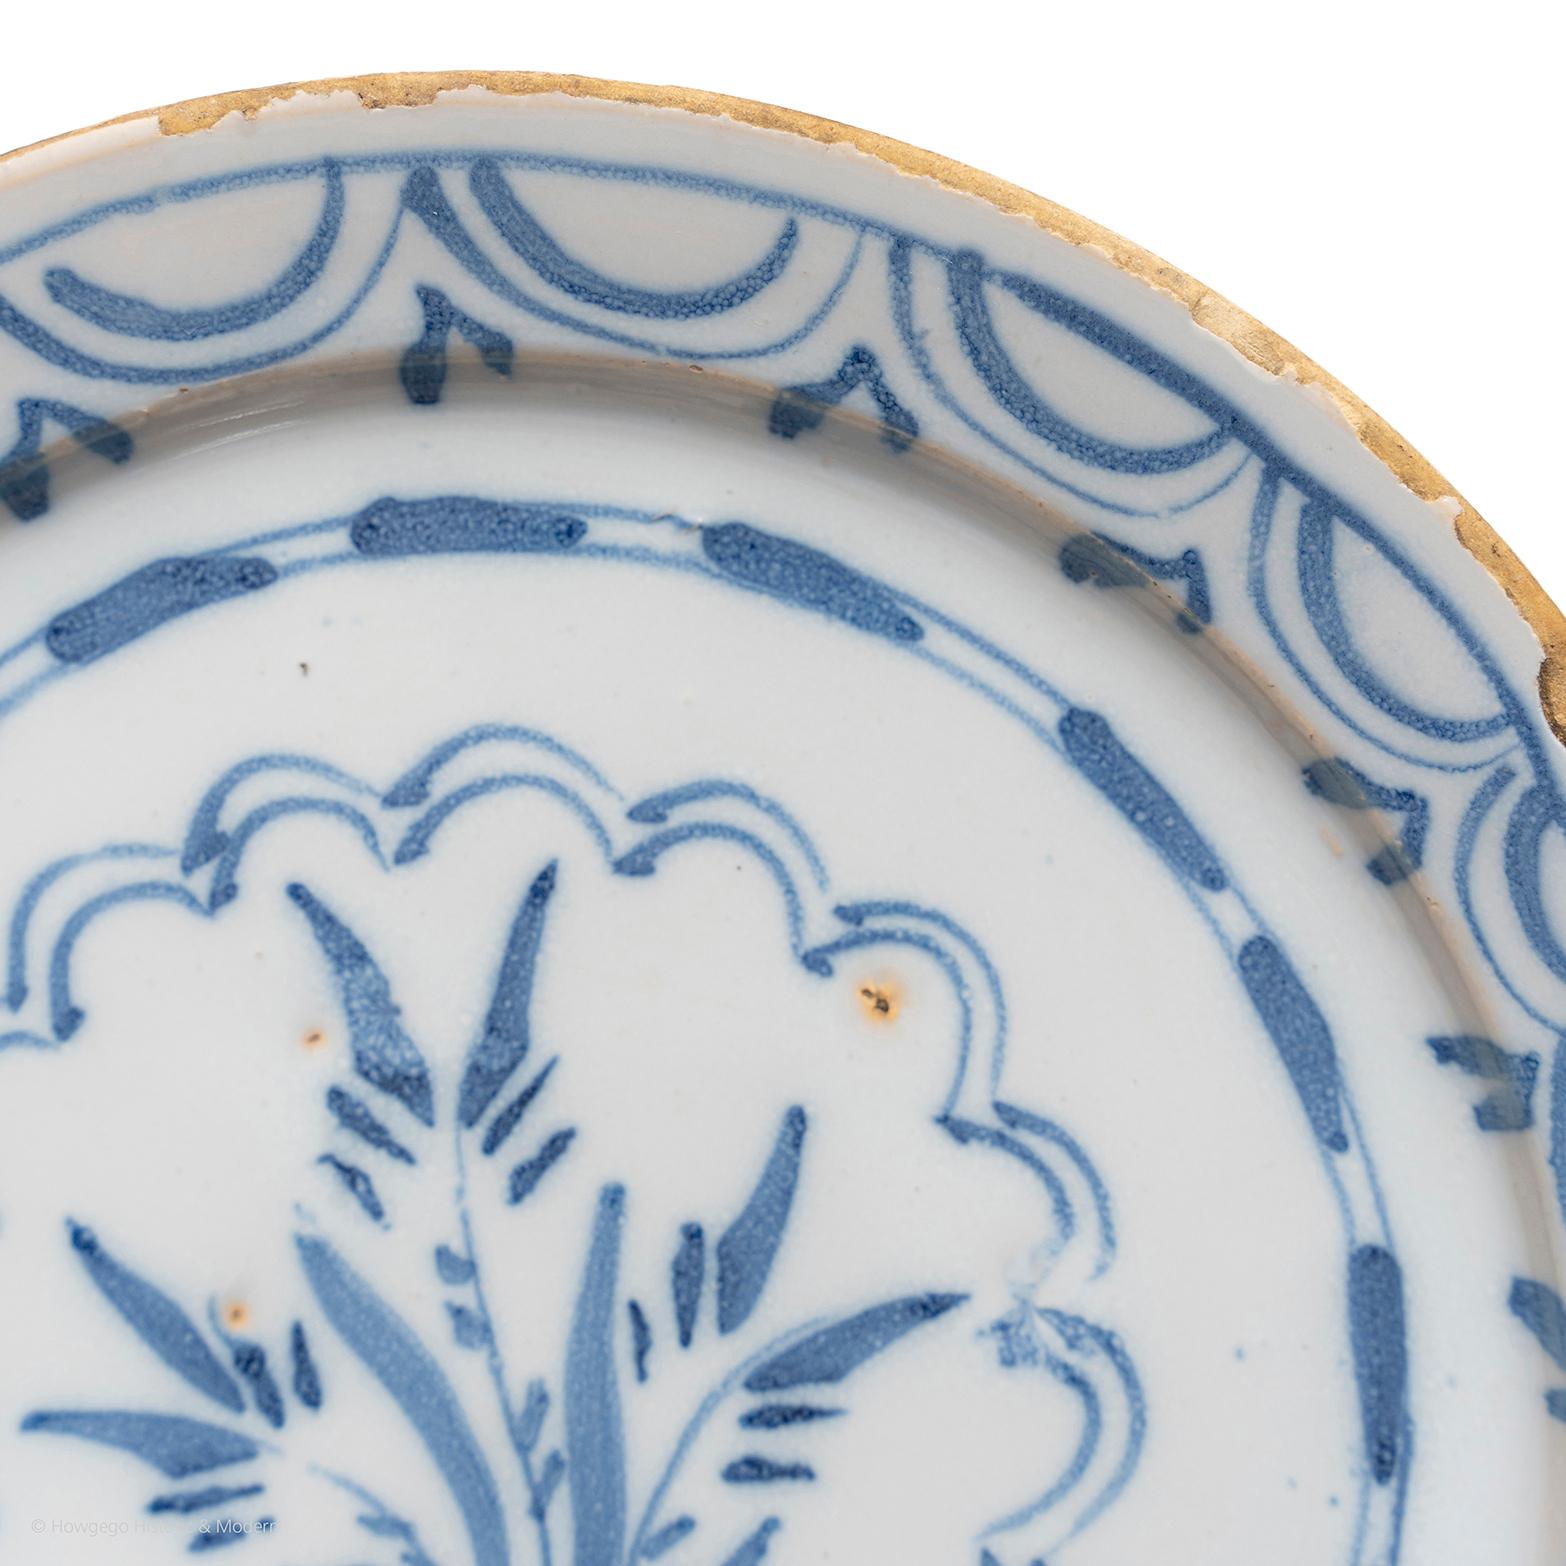 Hand-Painted Plate Delftware, English Small Stylised Floral Spray London, Blue and White For Sale